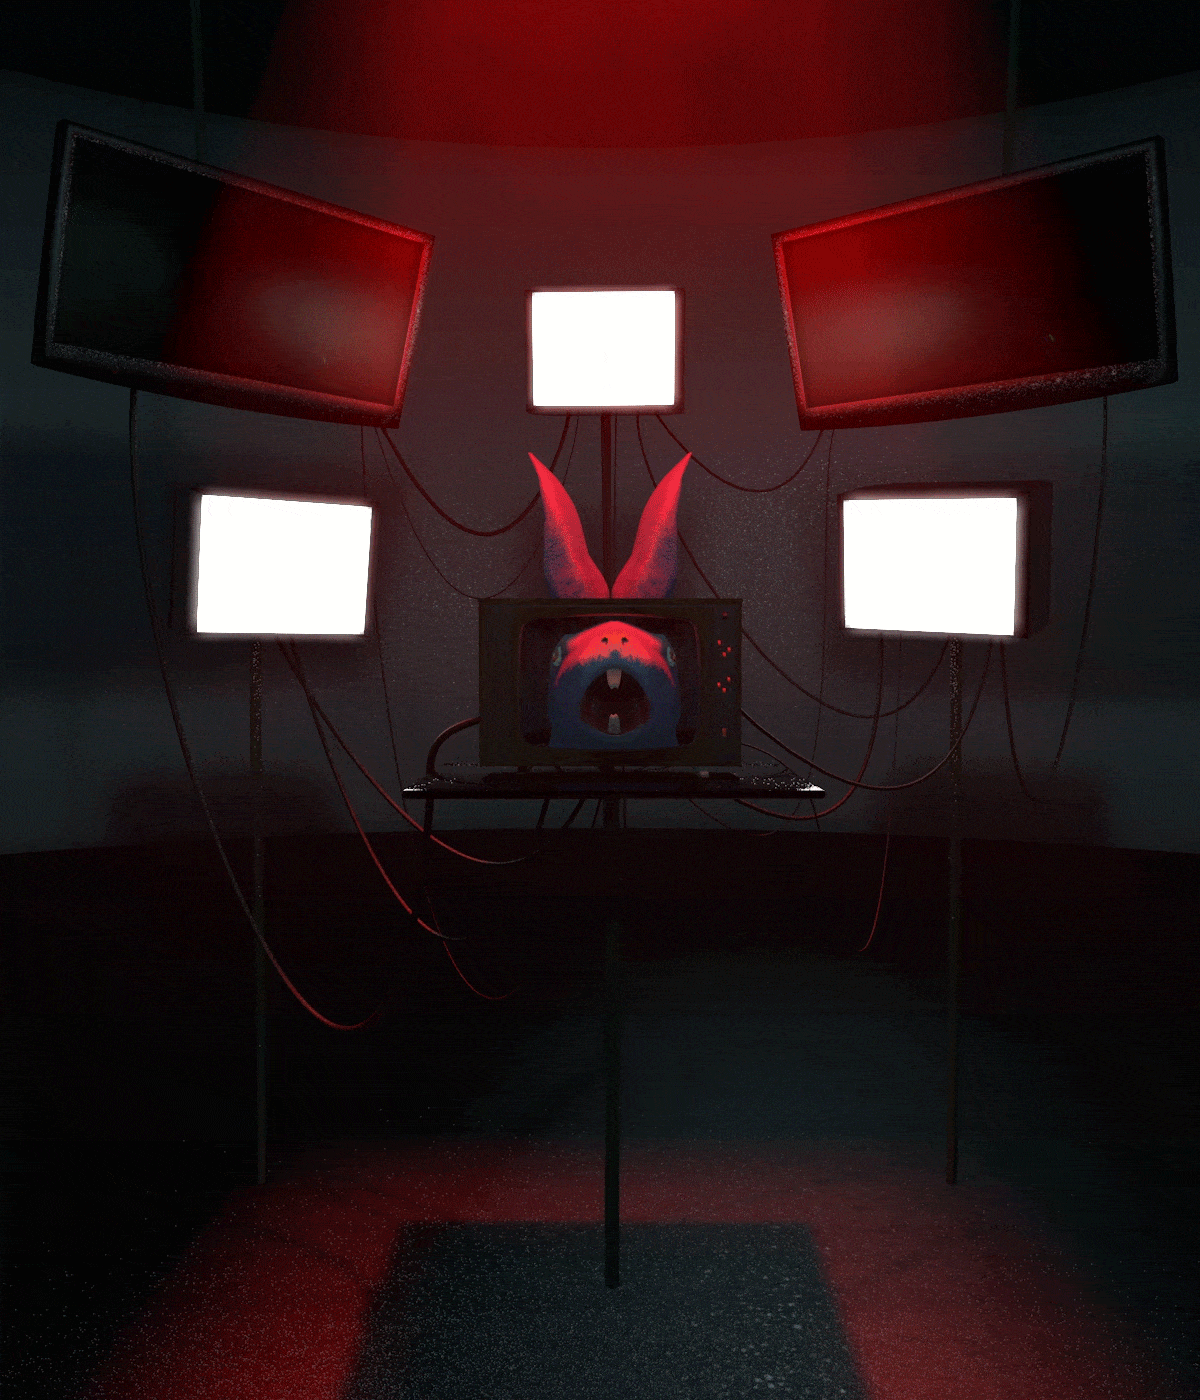 A cartoon rabbit head sits on a platform behind a TV screen, in a dark room illuminated by the bright white light of three higher screens